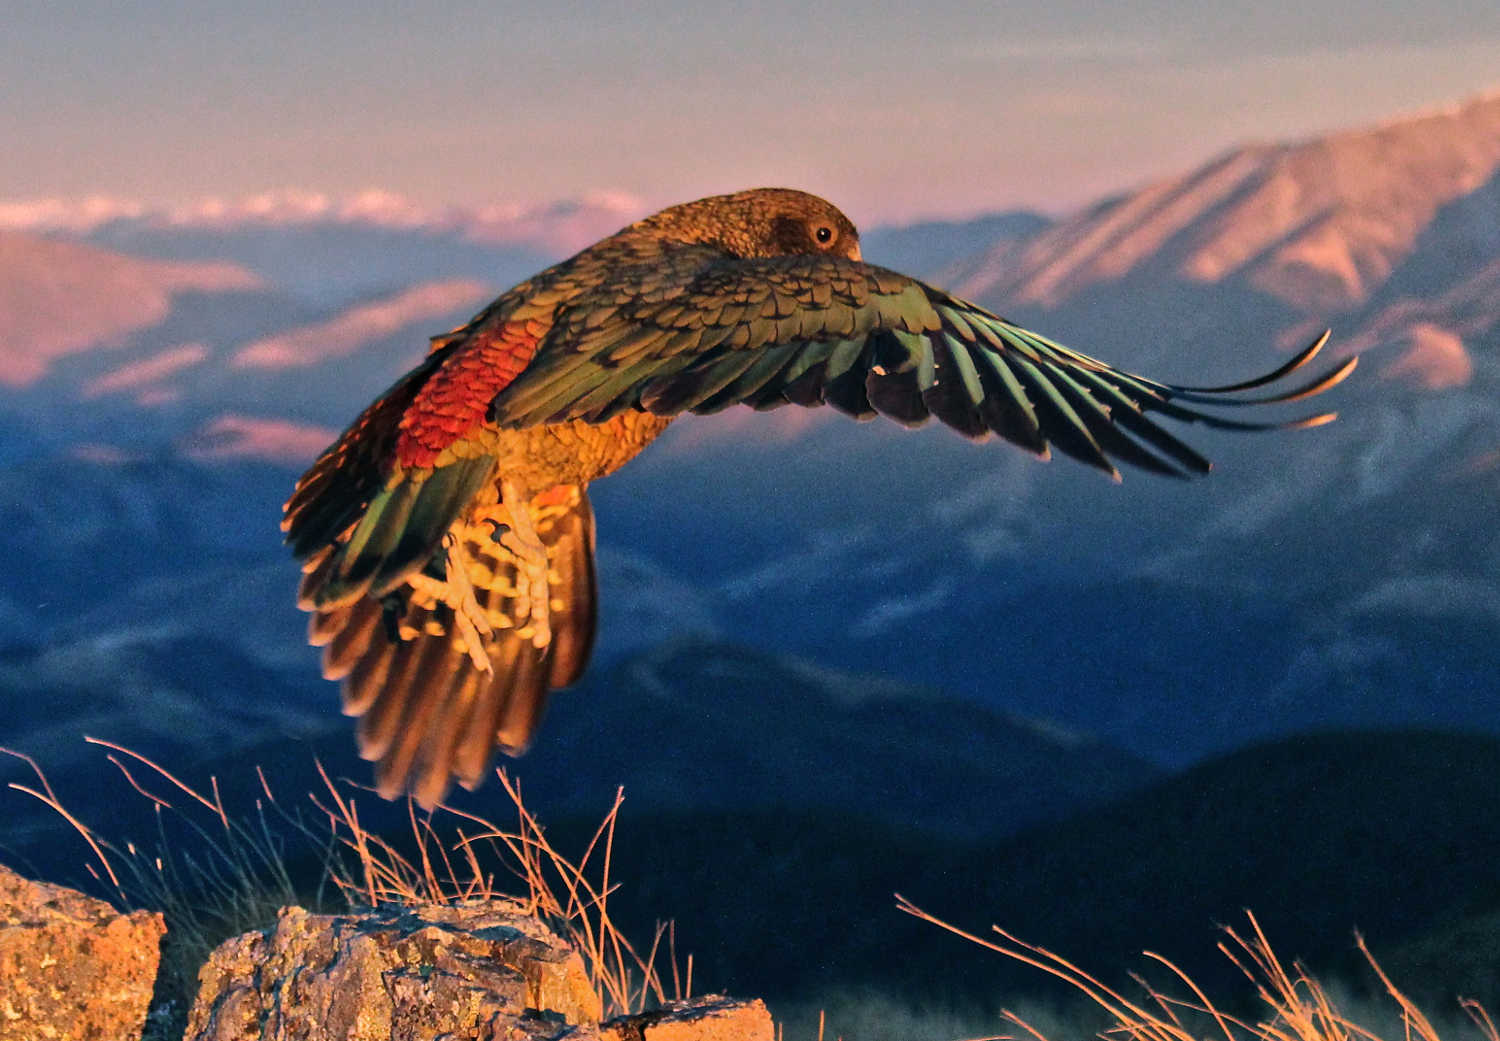 Kea shortly after taking off from a rock, New Zealand